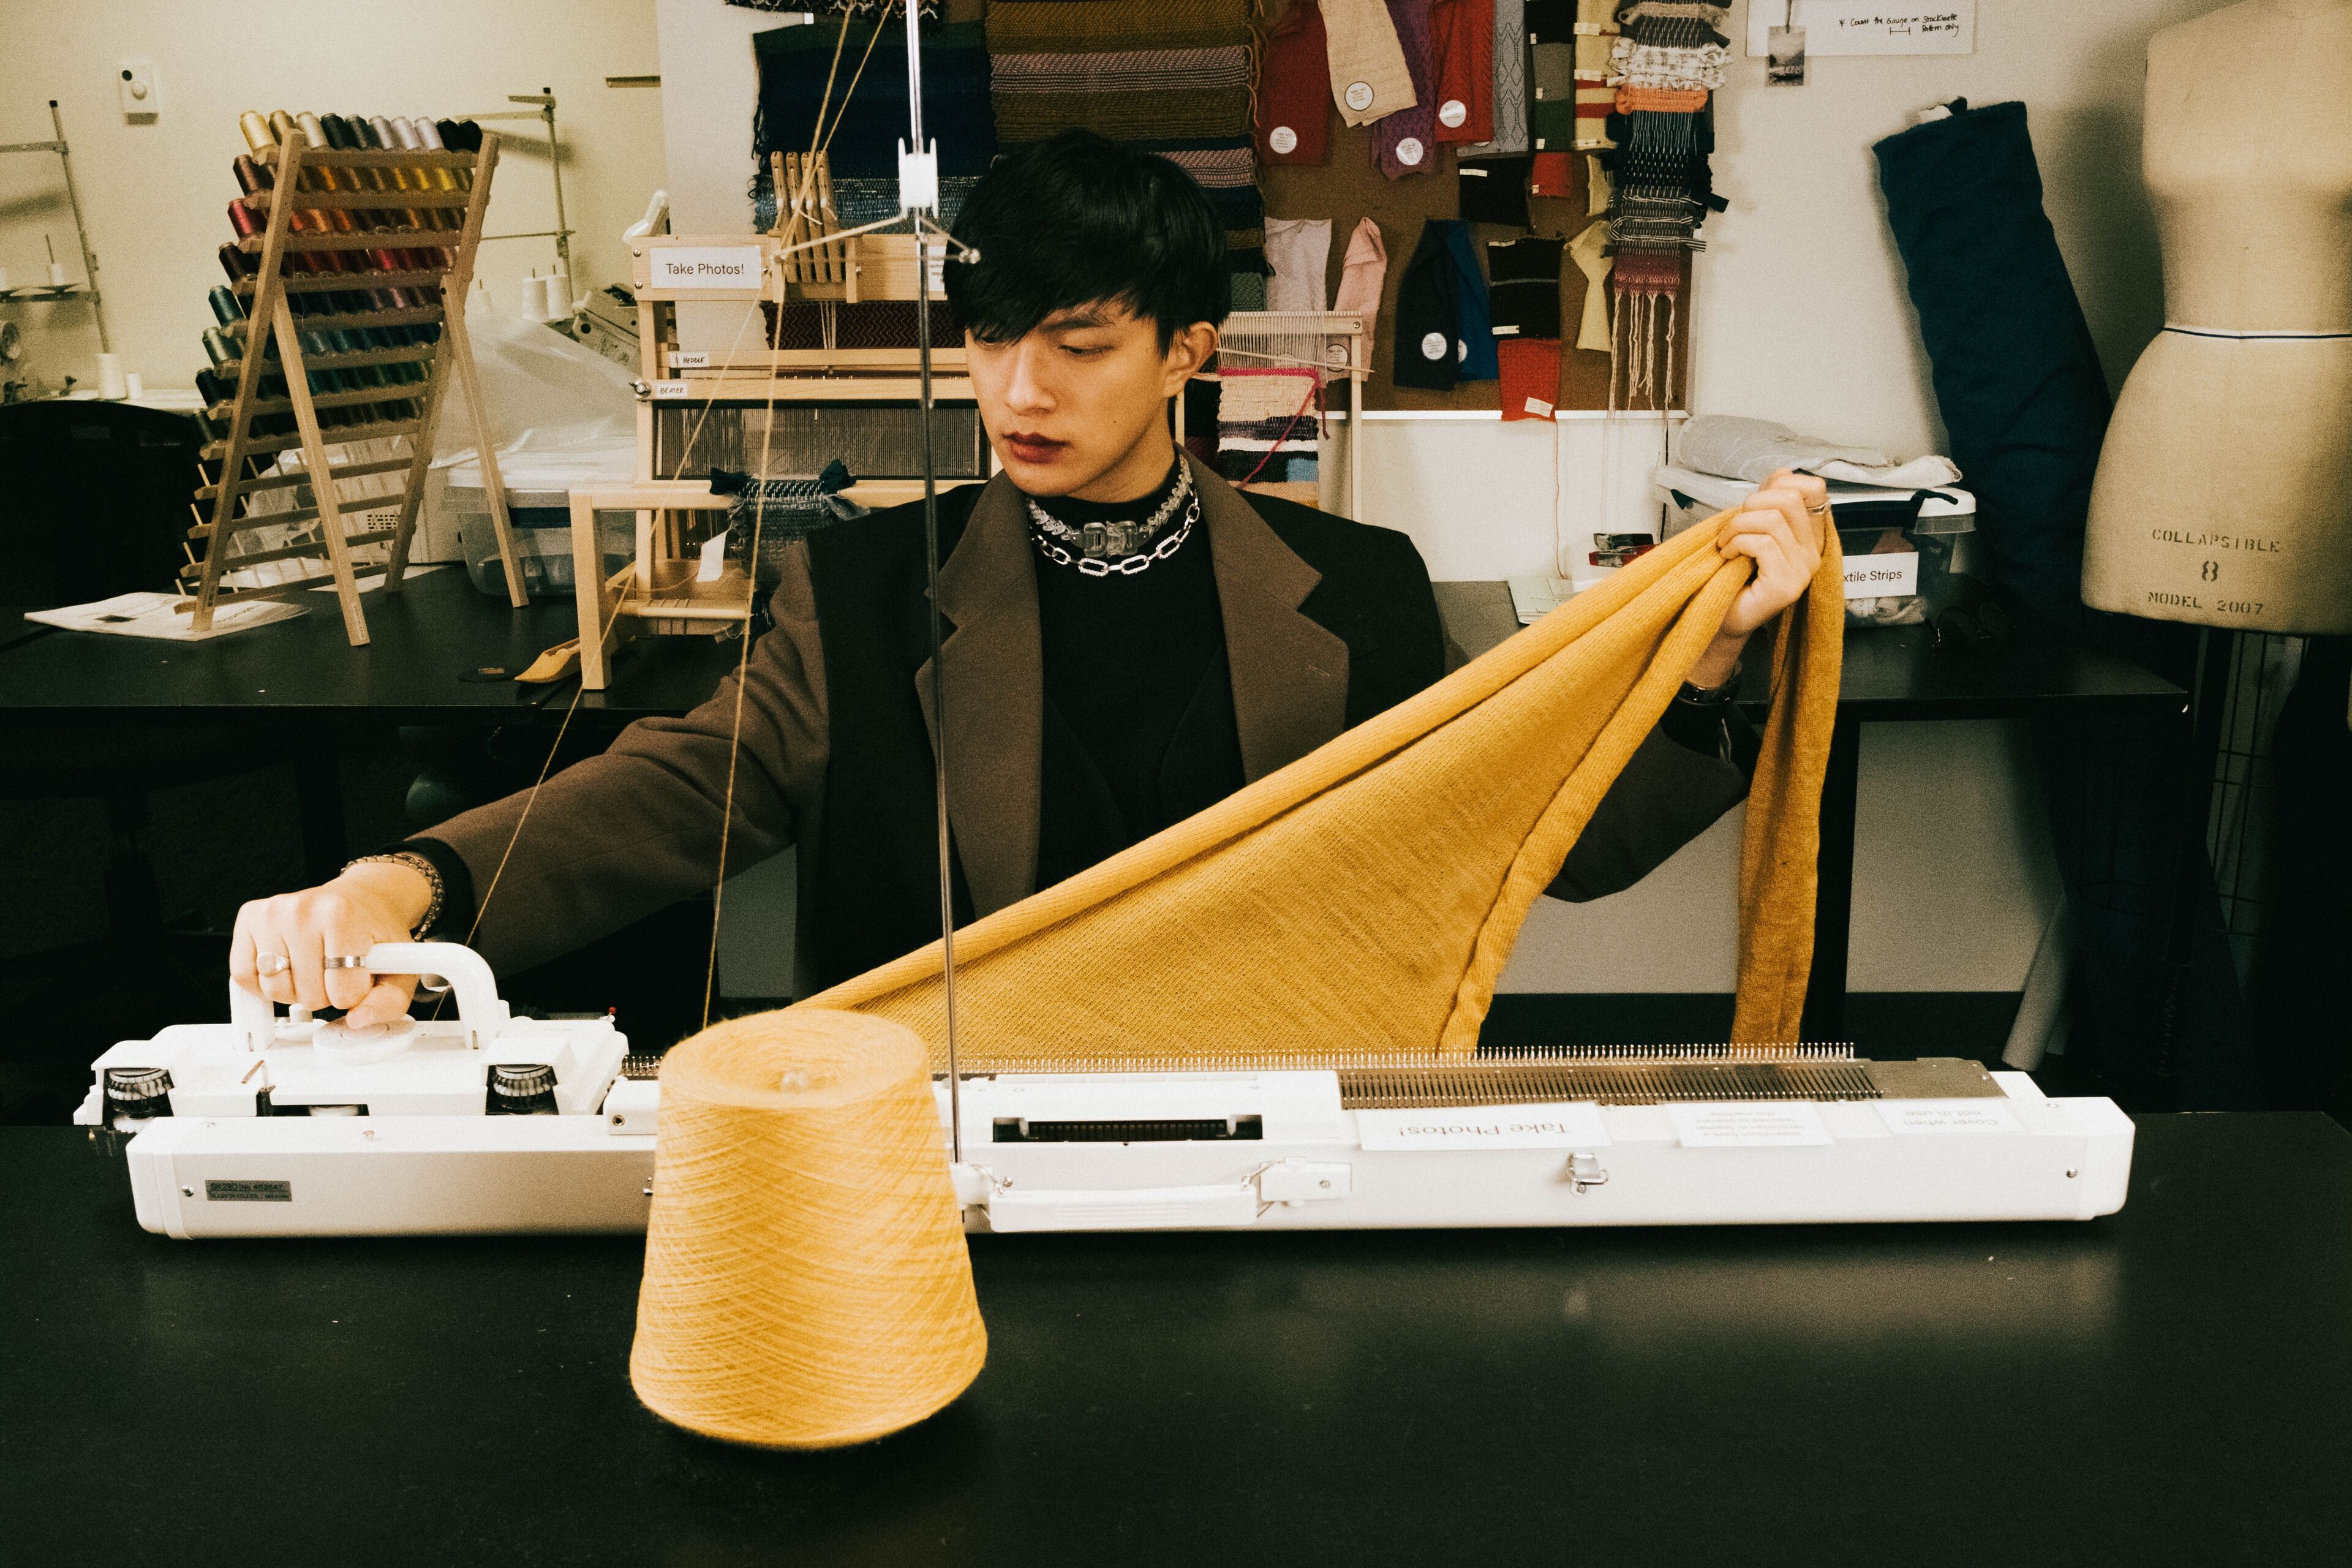 A focused designer operates a knitting machine, crafting a yellow textile piece, surrounded by a creative studio environment.